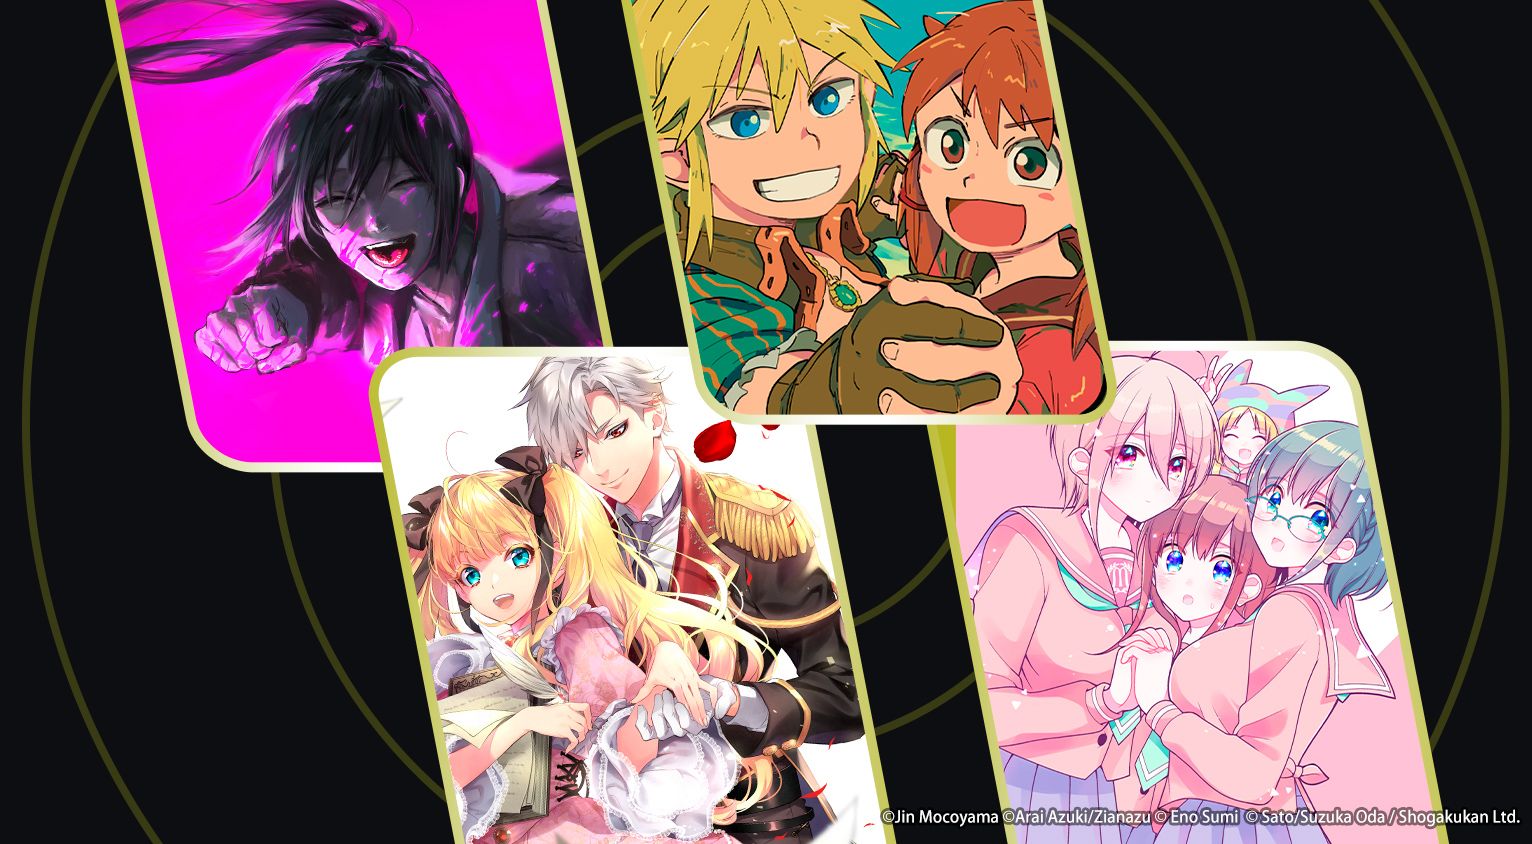 Comikey Media Announces 4 new MangaOne Titles For Simulpublication in the month of February 2022